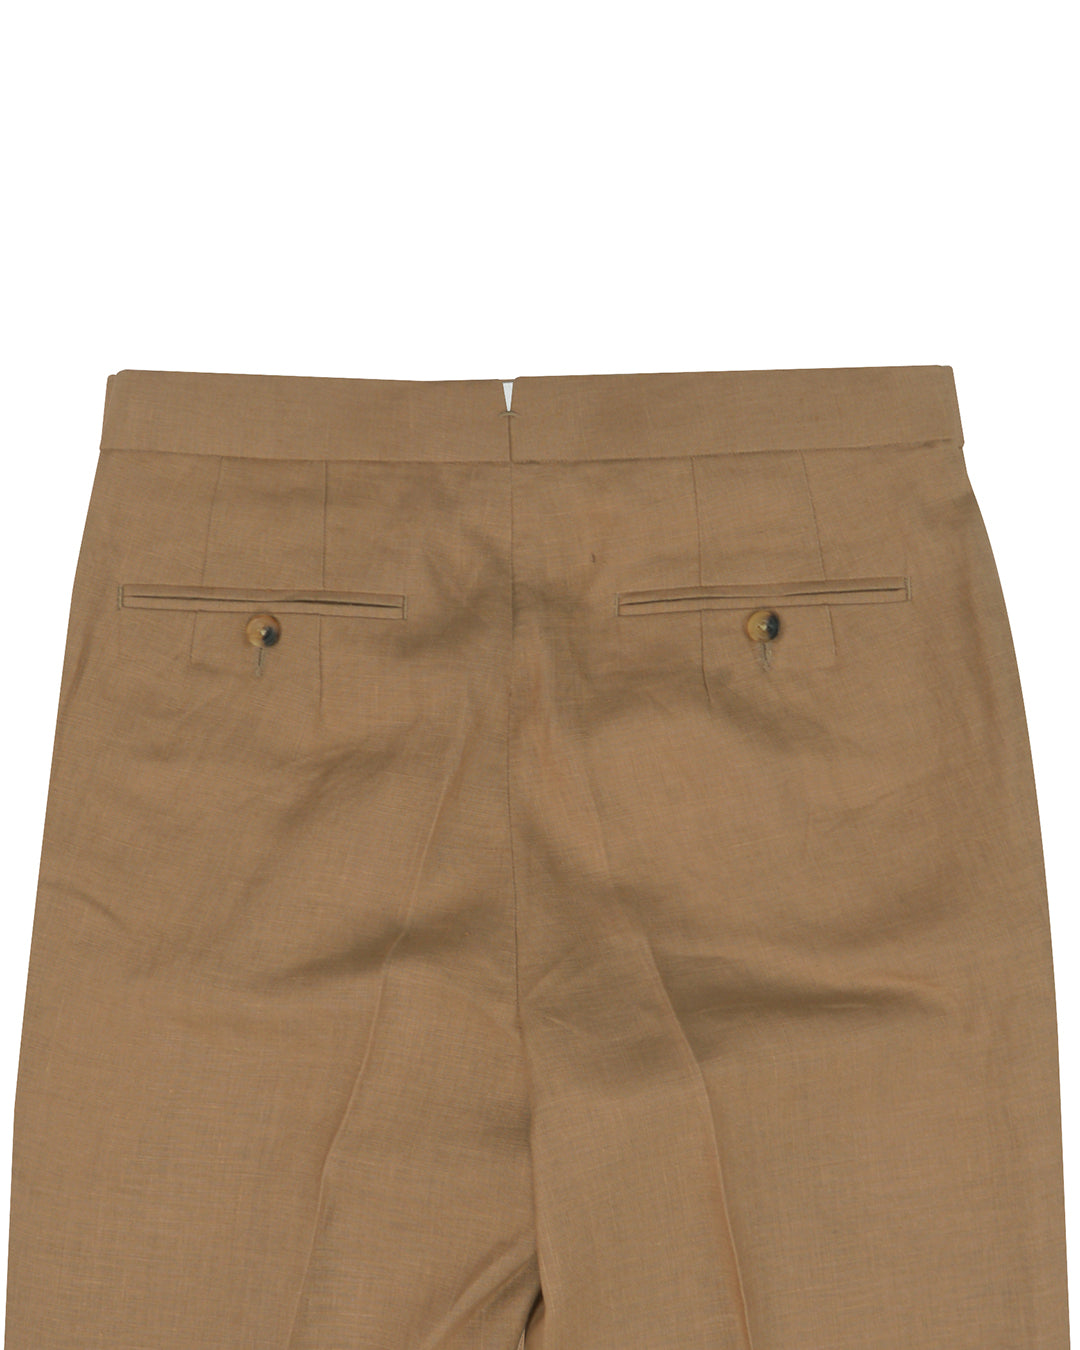 Back view of custom linen pants for men by Luxire in golden brown